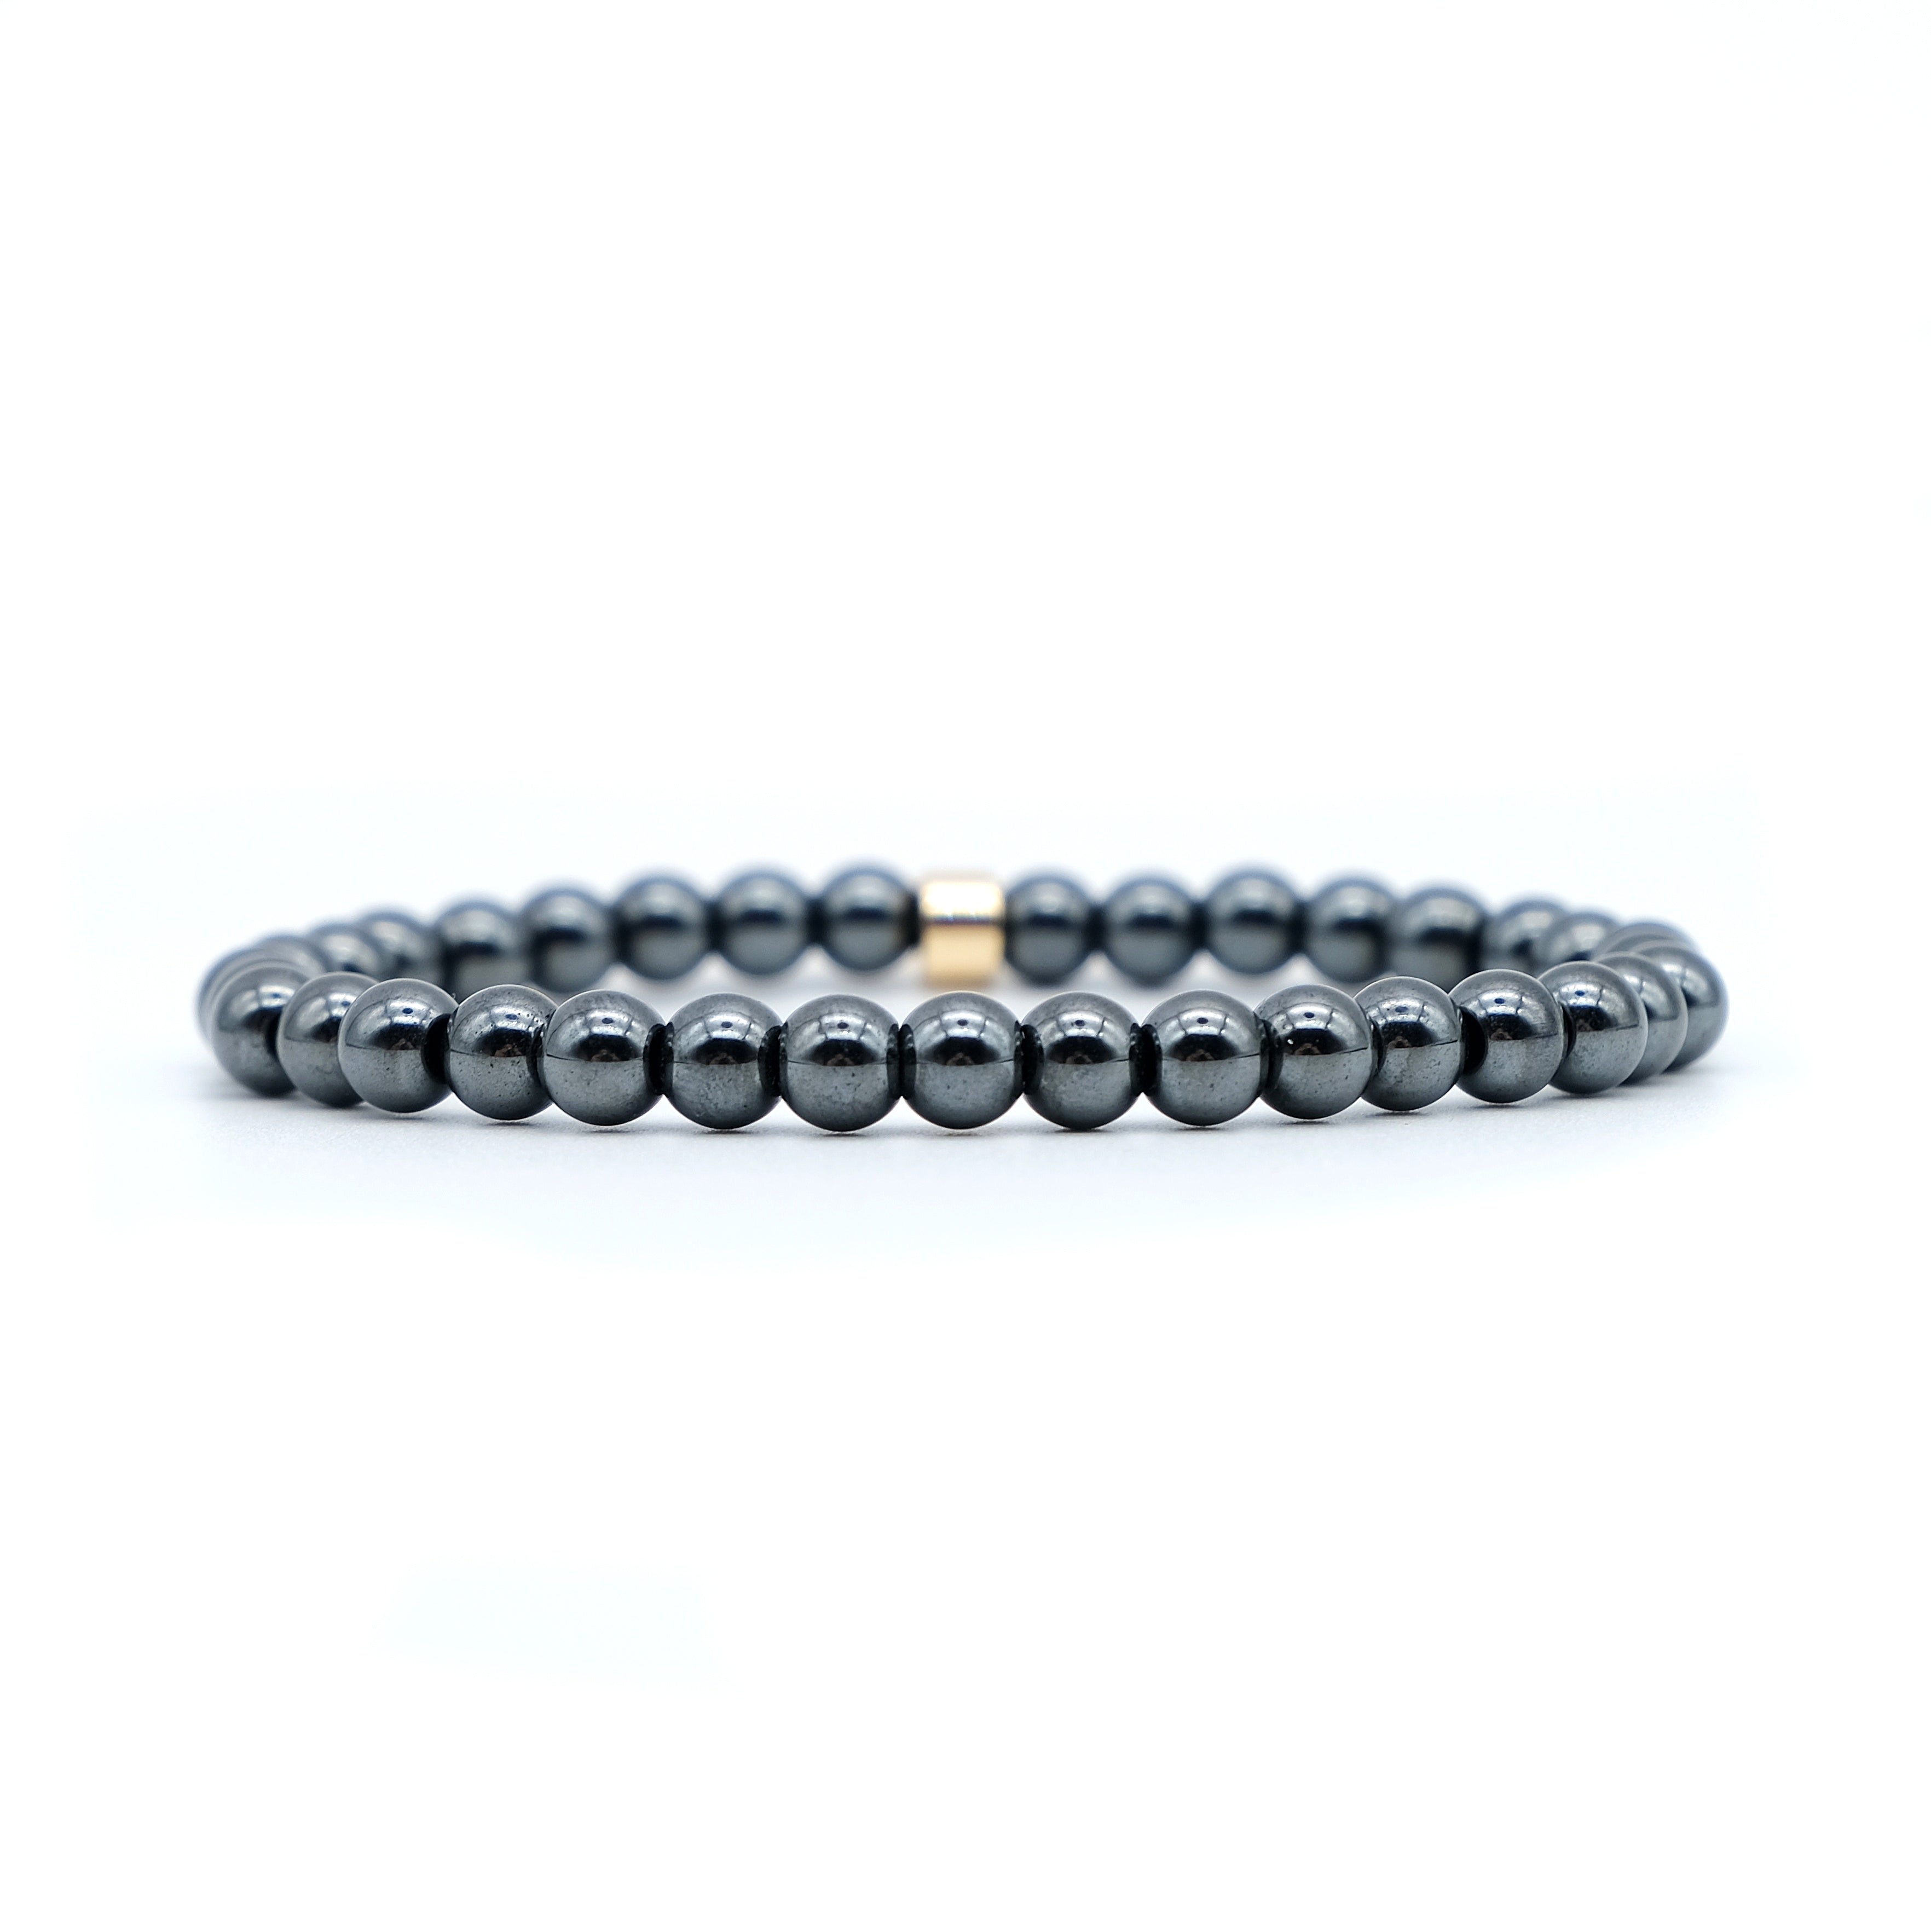 Hematite gemstone bracelet in 6mm beads with gold accessory